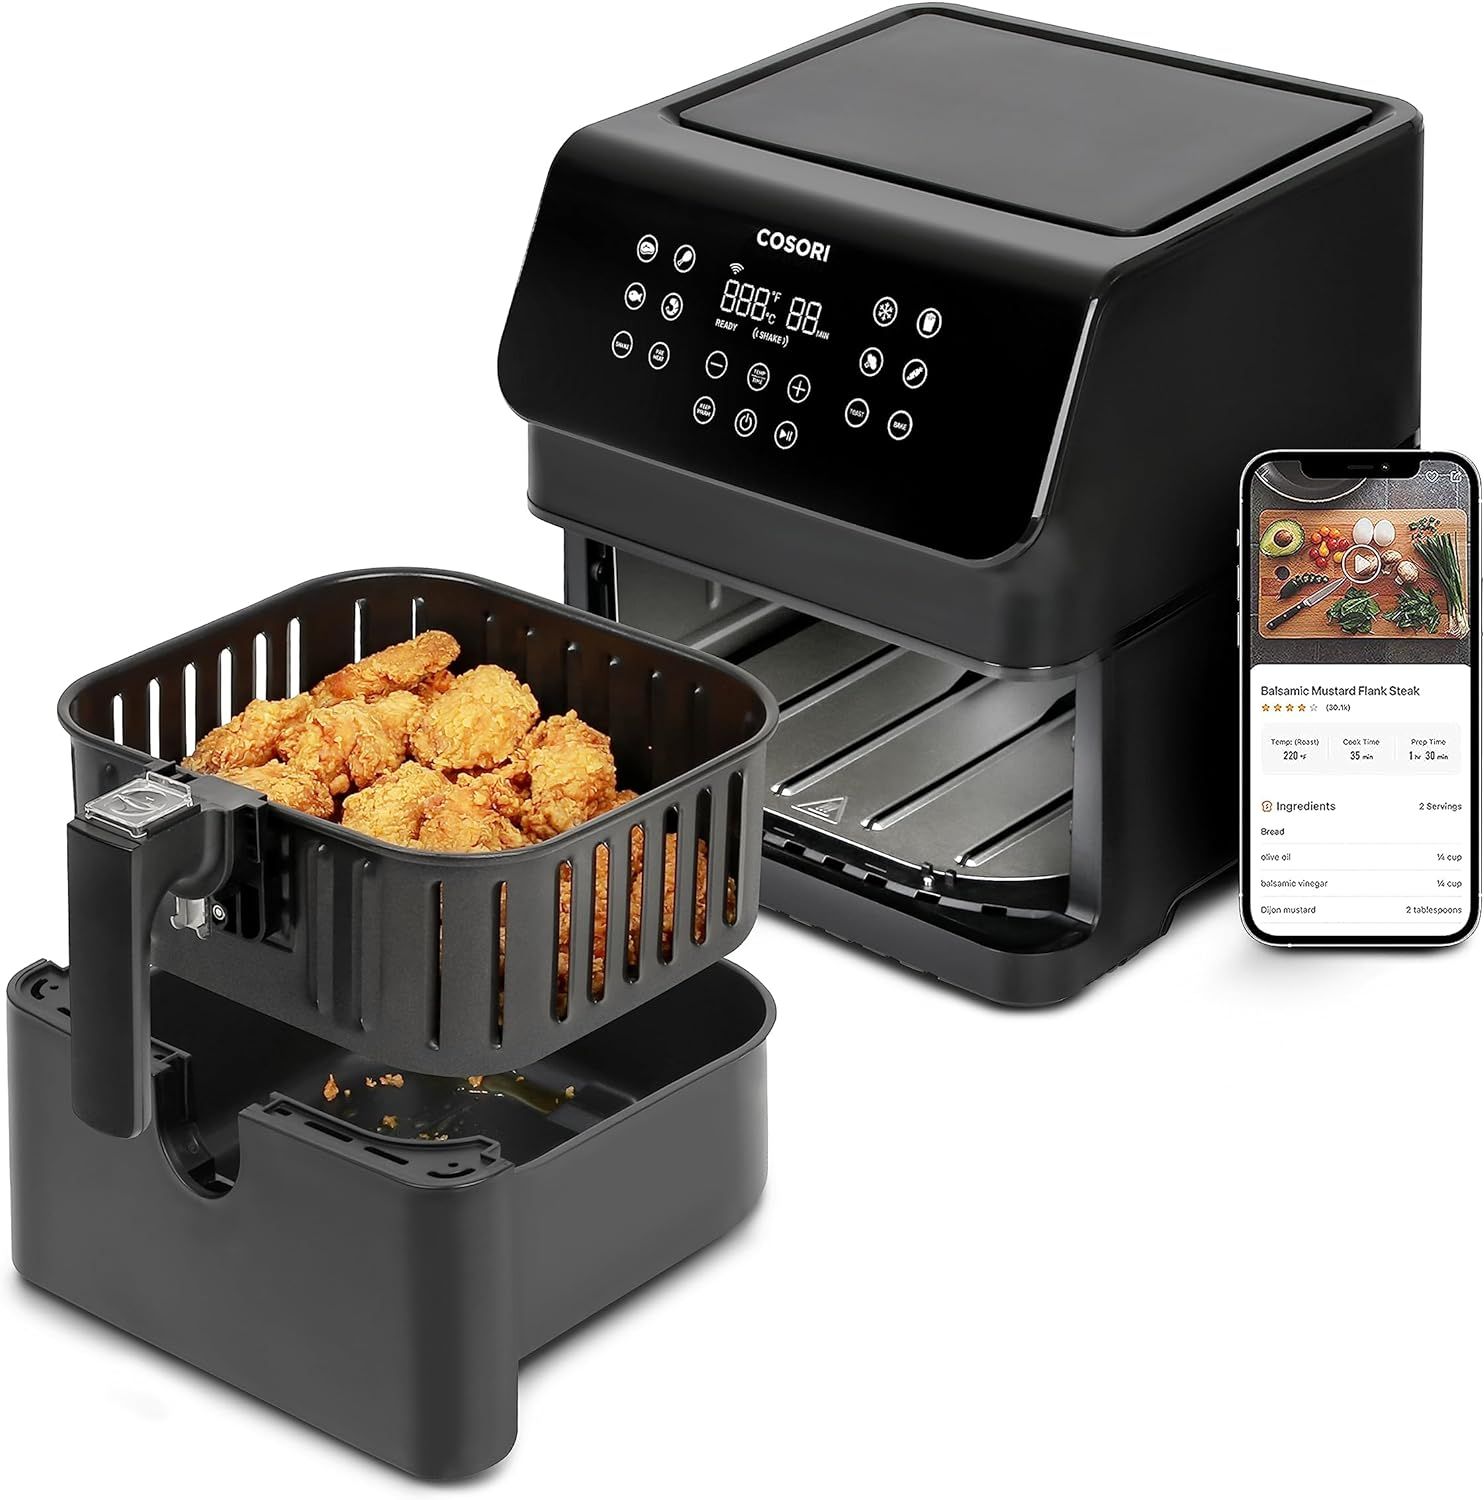 COSORI Air Fryer Pro Smart 5.8QT that Roast, Bake, 3-Way Control, 12-IN-1 Customizable Functions,... | Amazon (US)